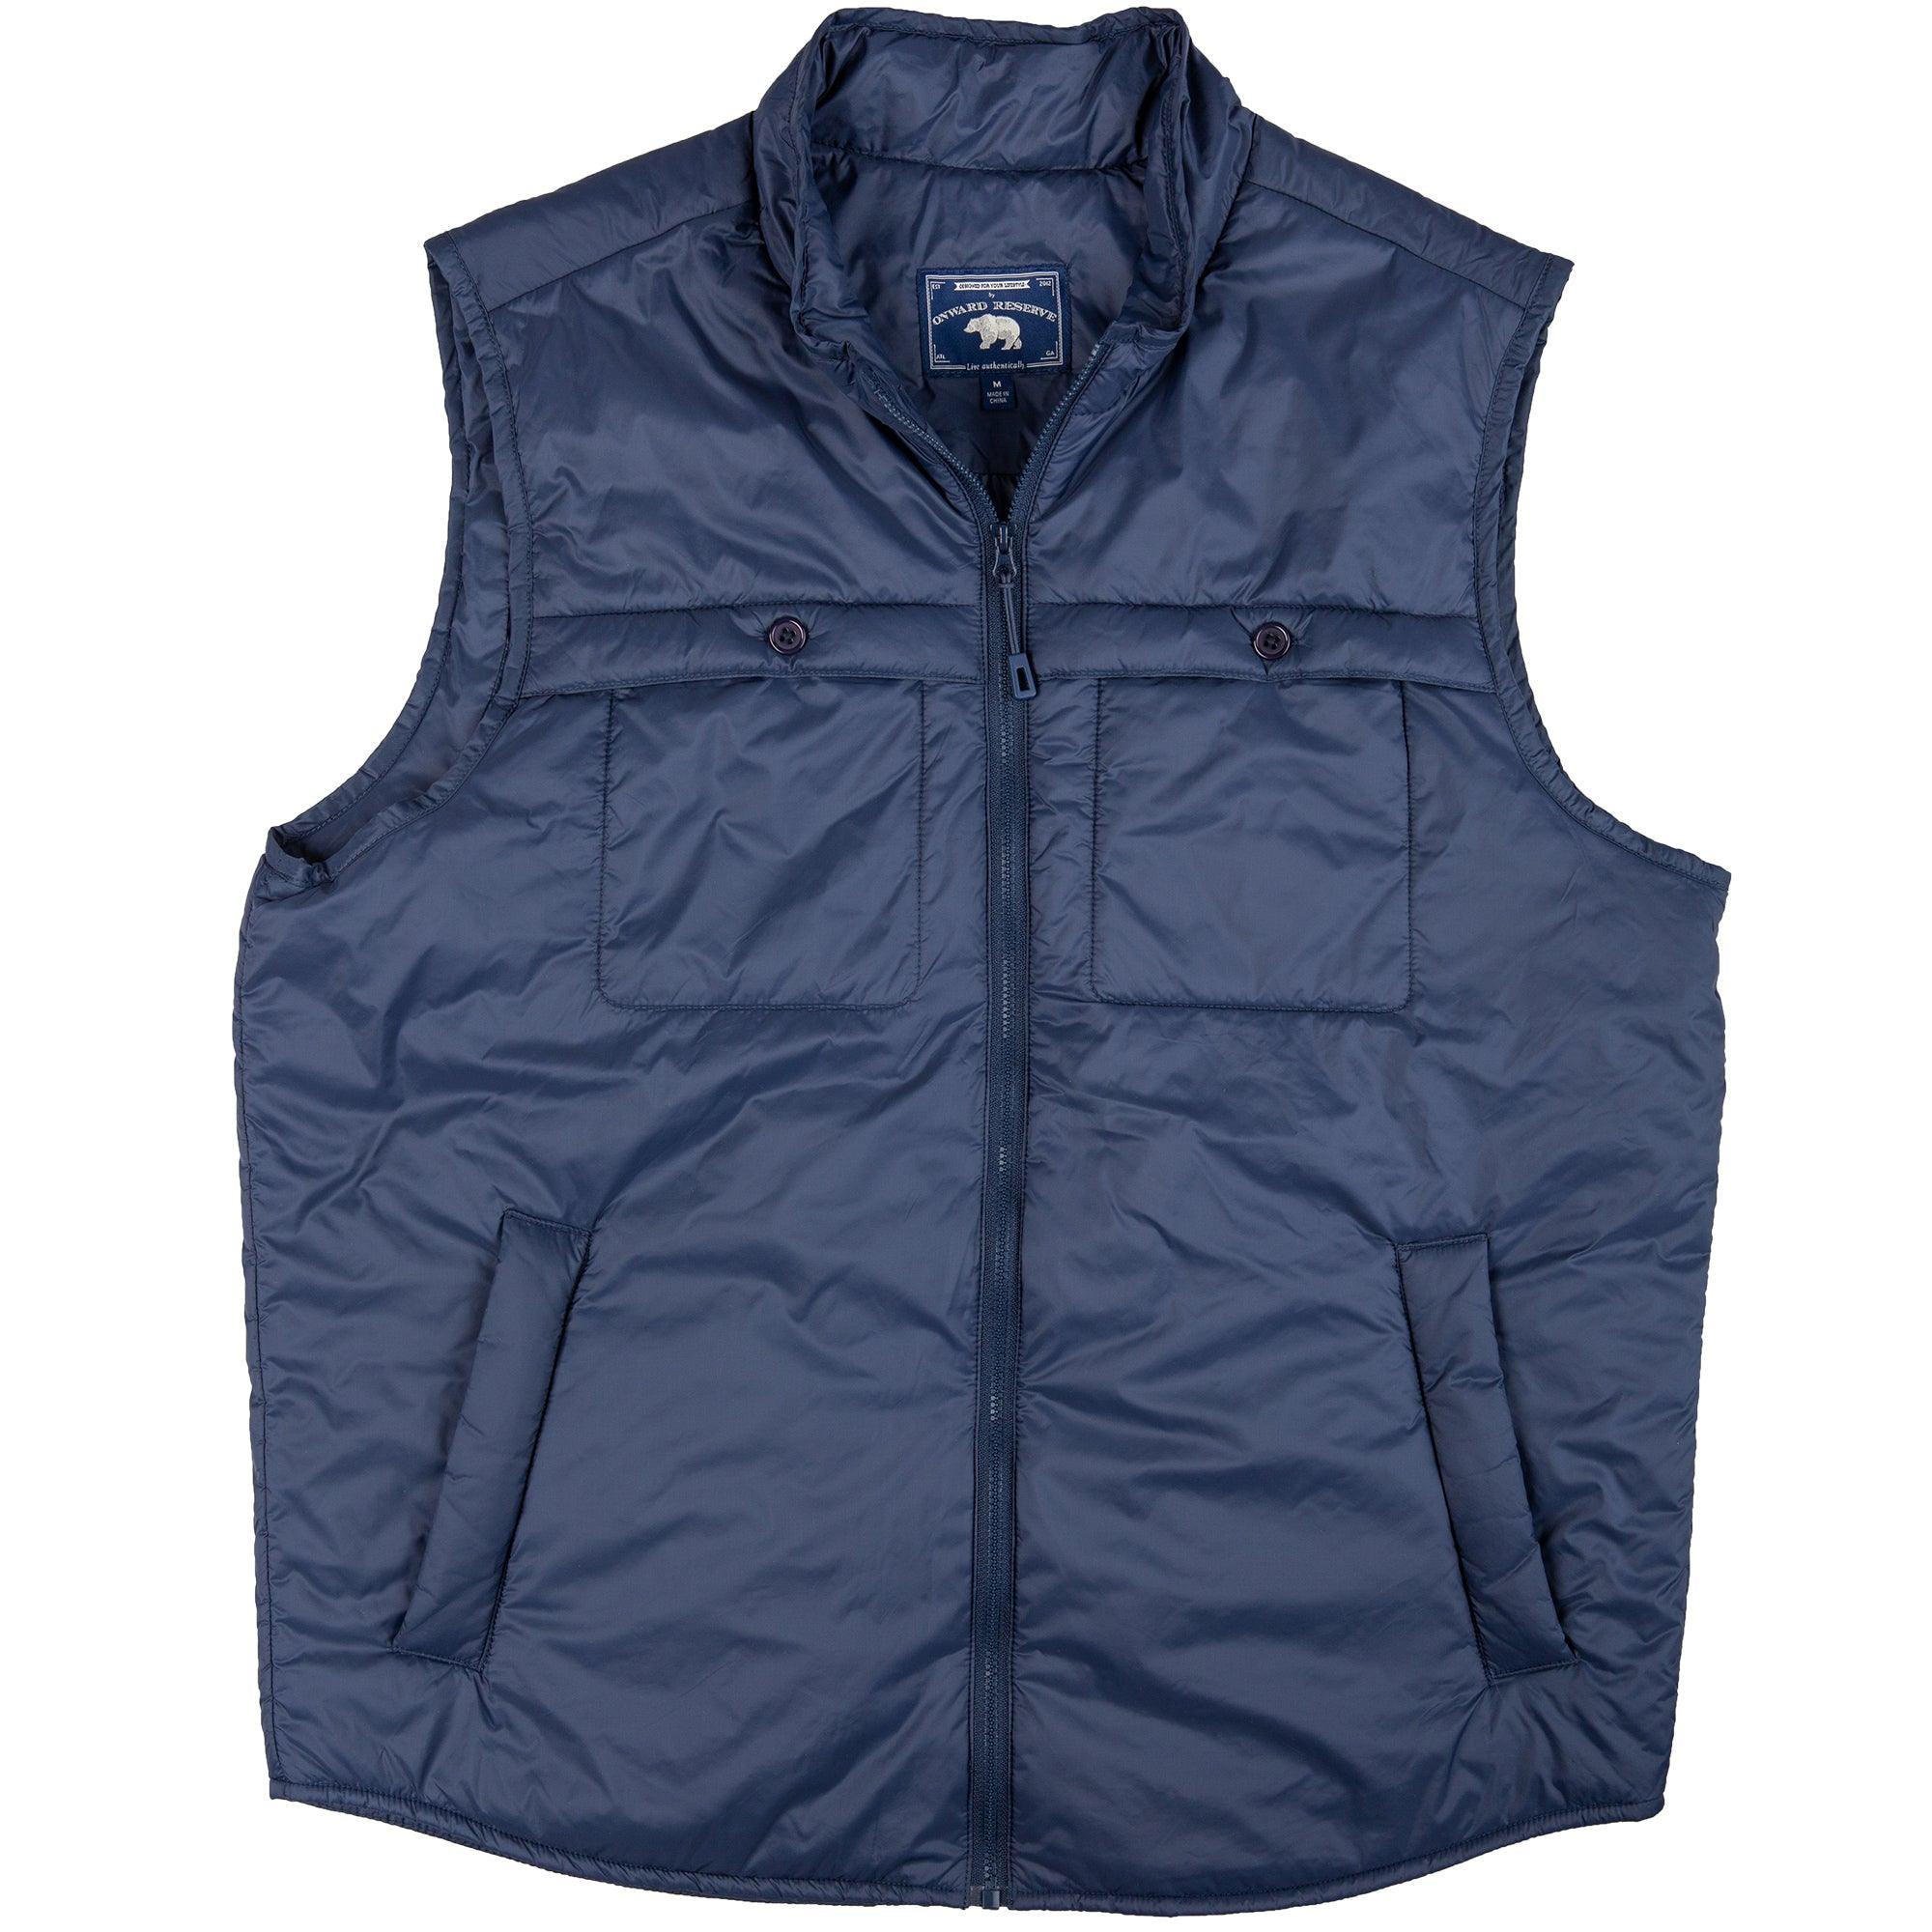 The Featherweight Vest – Onward Reserve